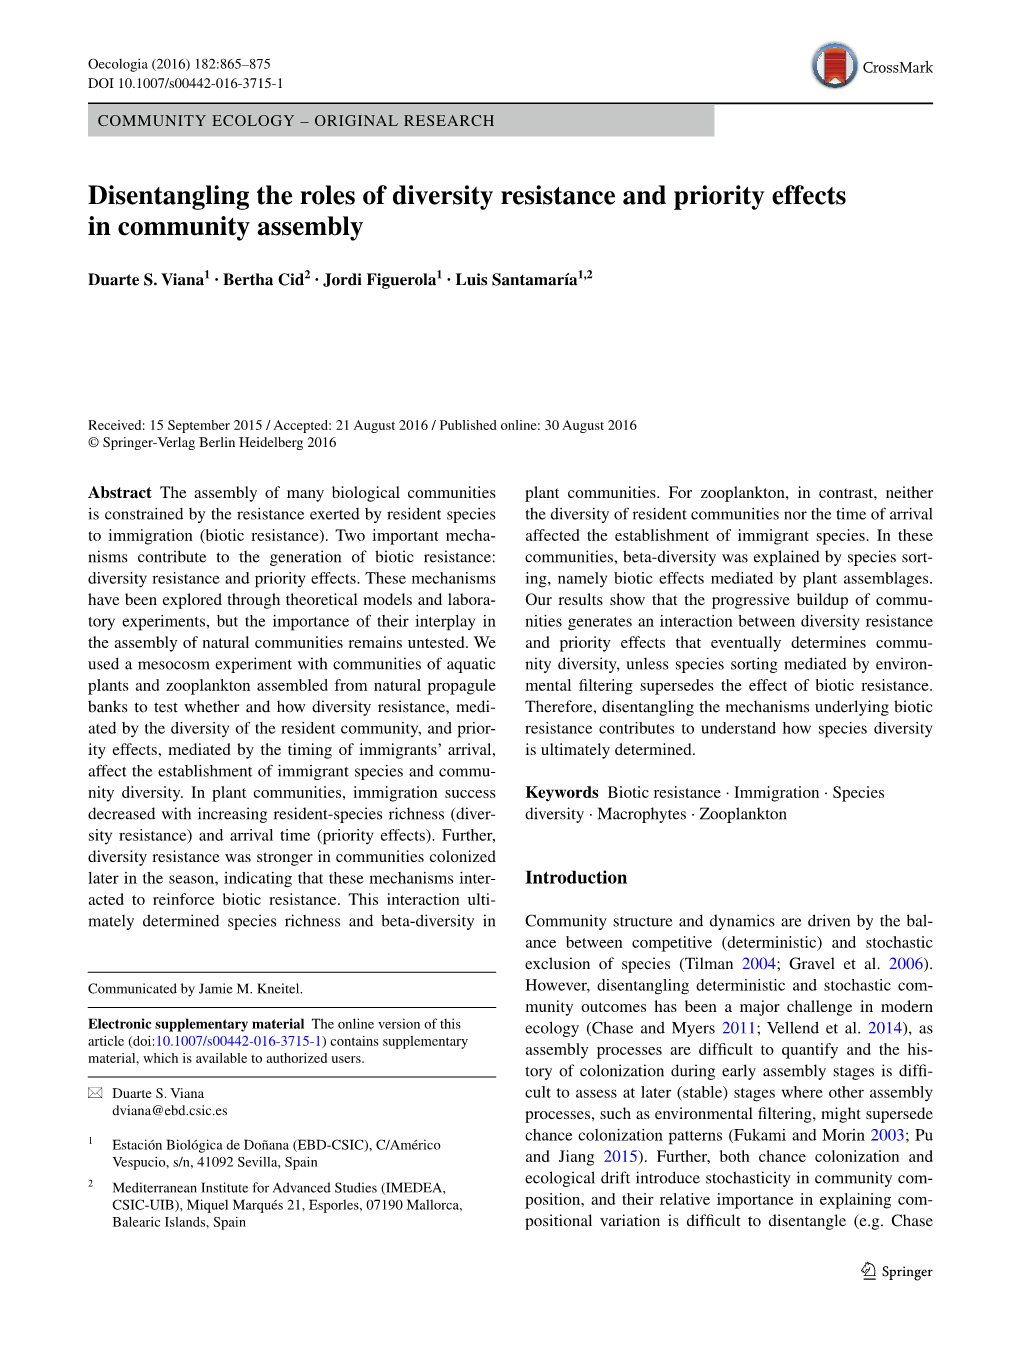 Disentangling the Roles of Diversity Resistance and Priority Effects in Community Assembly